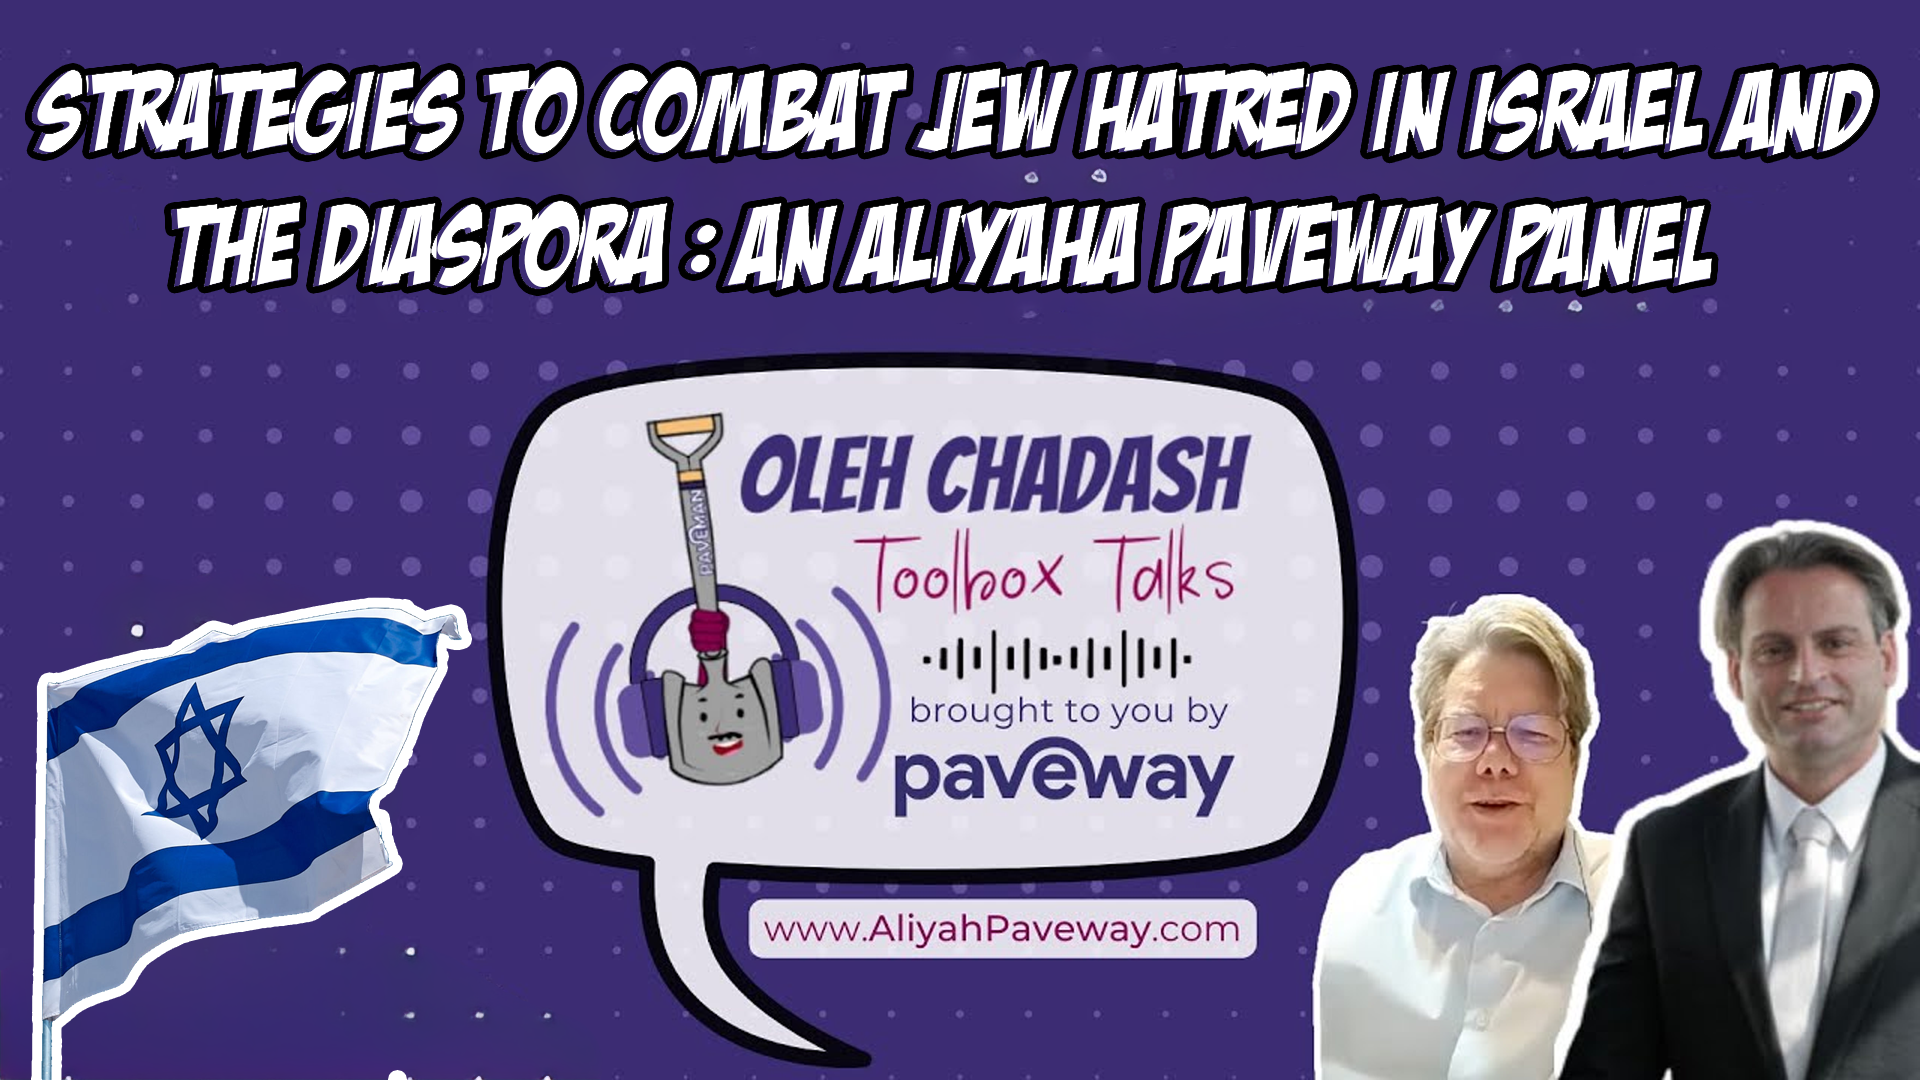 Strategies to Combat Jew Hatred in Israel and the Diaspora : An Aliyaha Paveway Panel